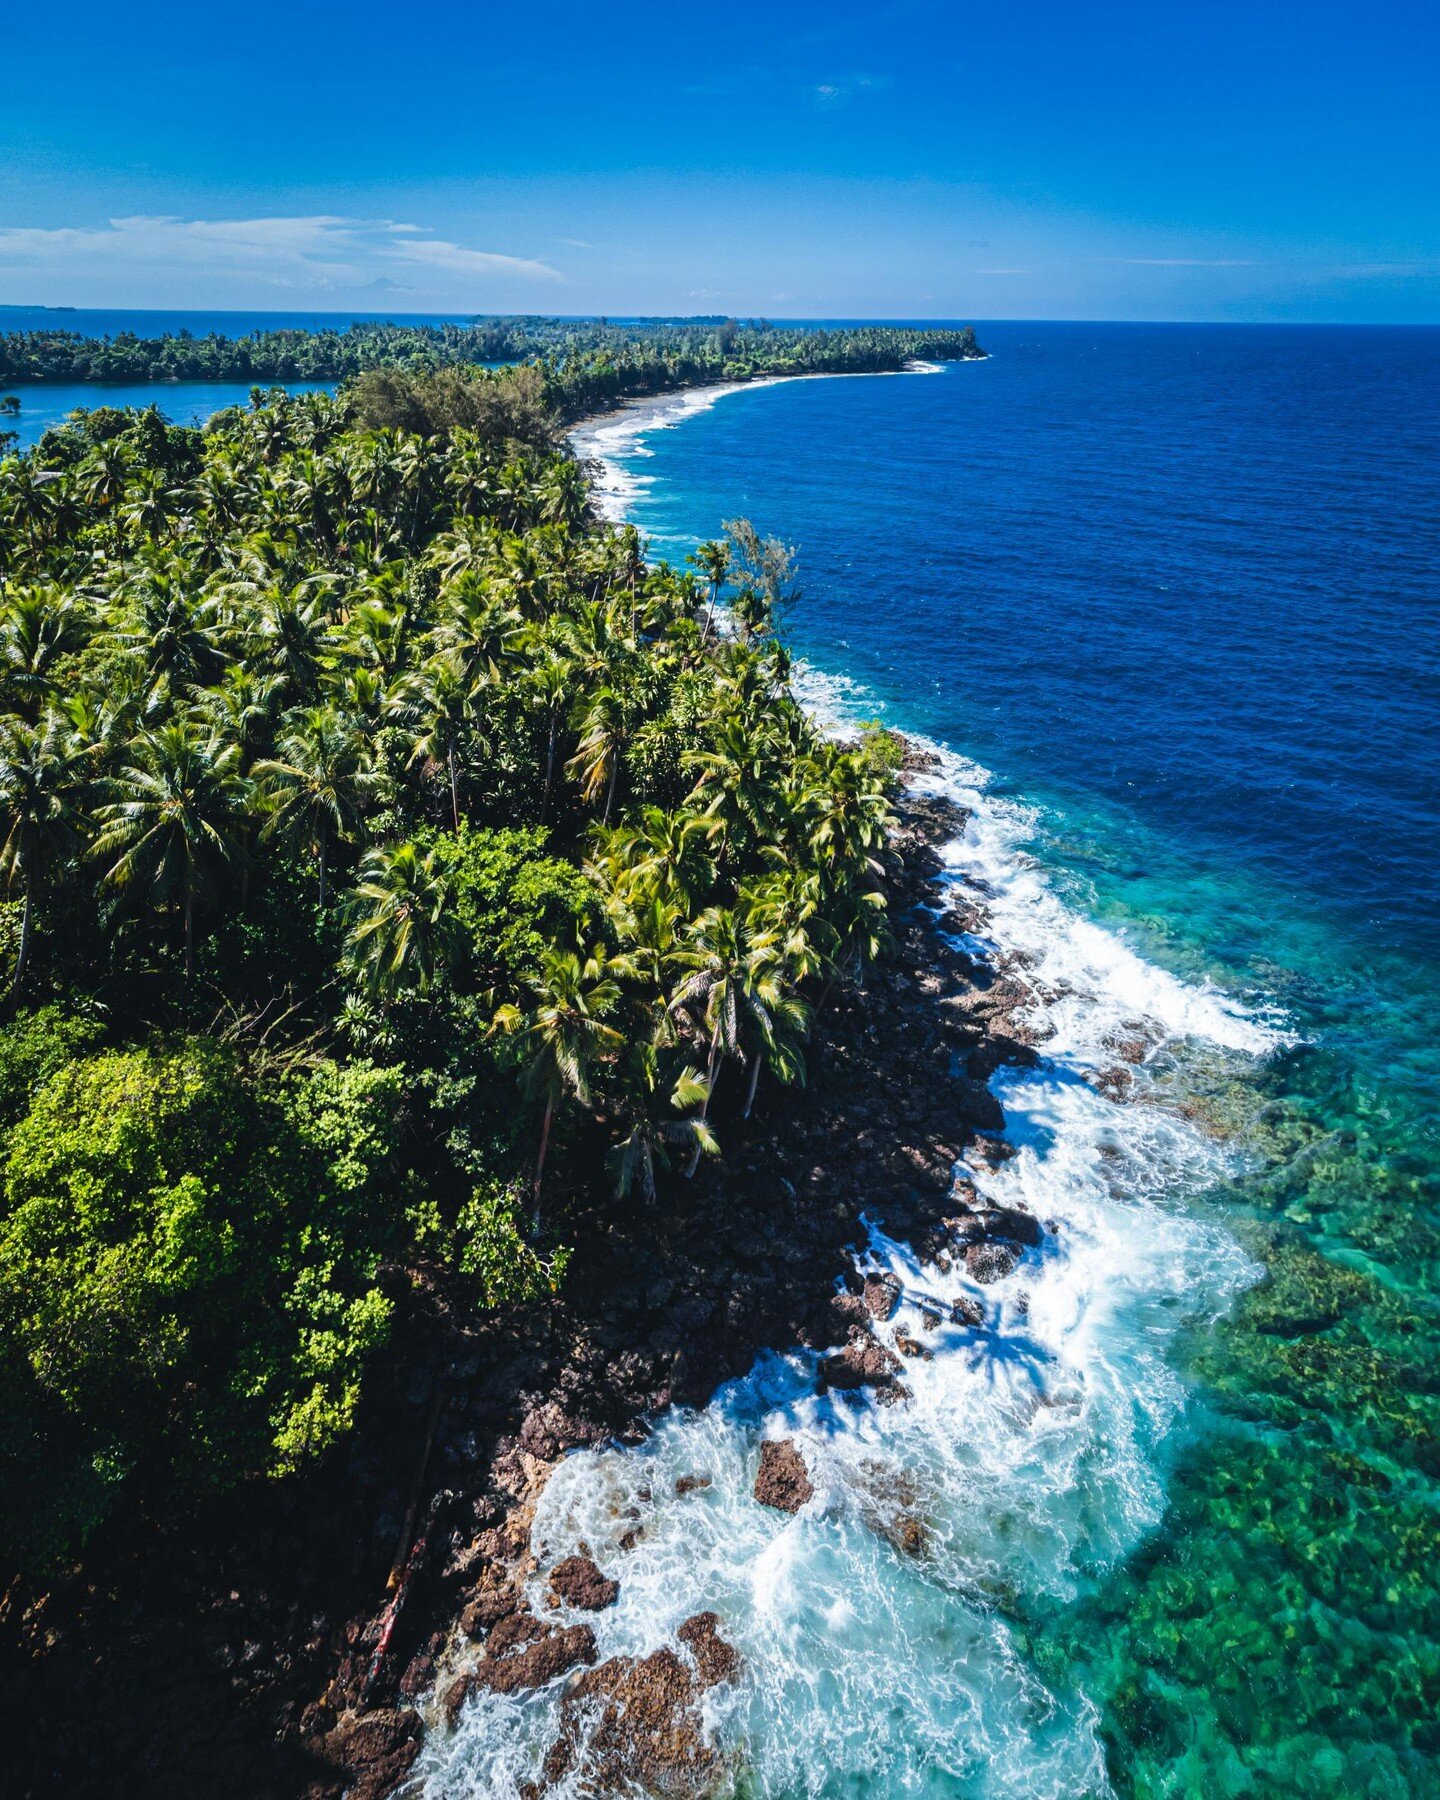 🌴 Madang's Coastal Allure from Above 

🌊🏖️Lucky us, surrounded by this breathtaking coastline beauty! 
 
Photos By @martijnvandenhouten 📷
#madangresort #papuanewguinea #tourismpng #pngtourism #travel #pngowned #weekend #visitpng